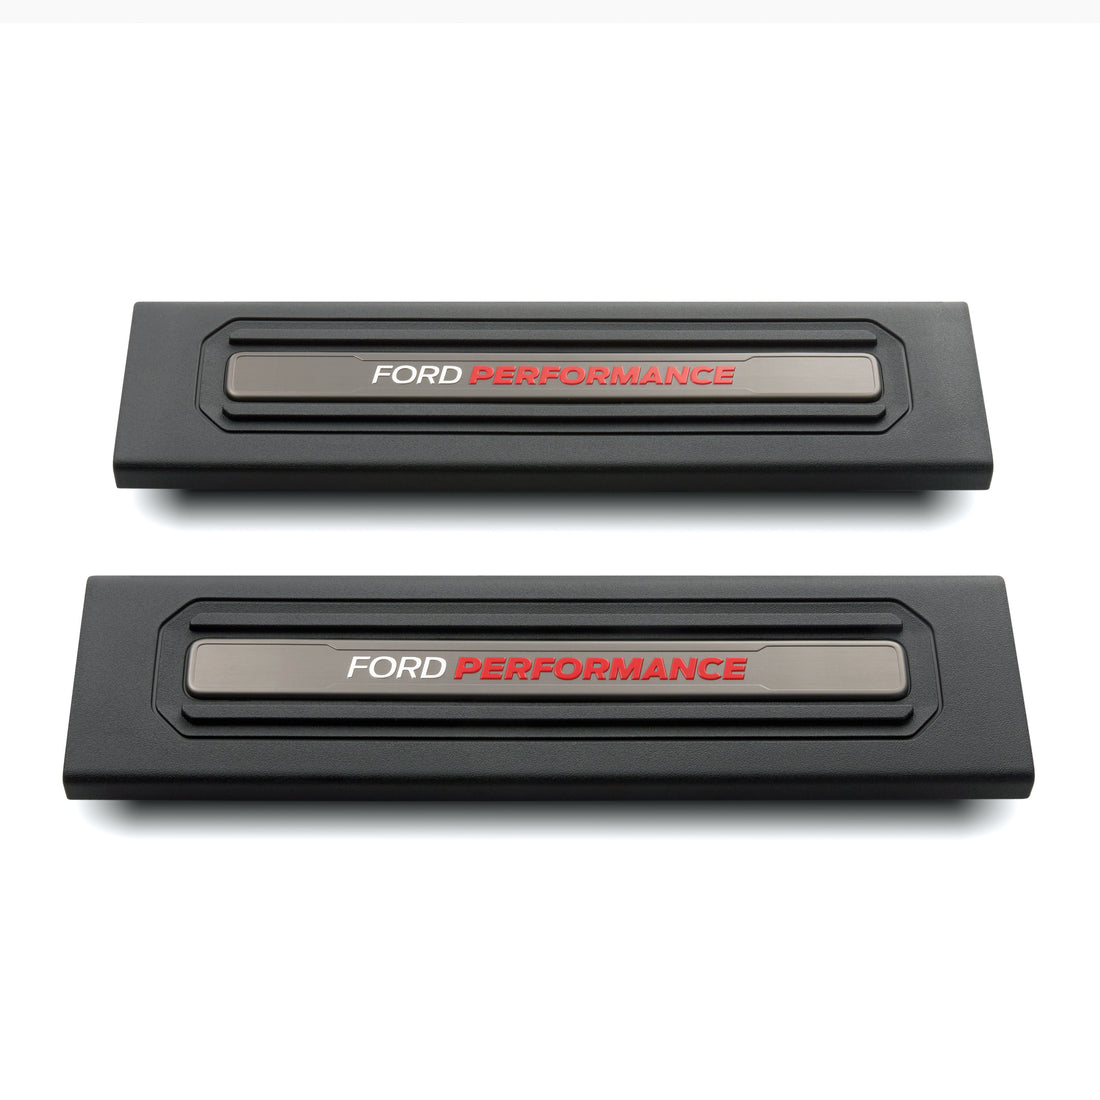 BRONCO FORD PERFORMANCE SILL PLATE KIT